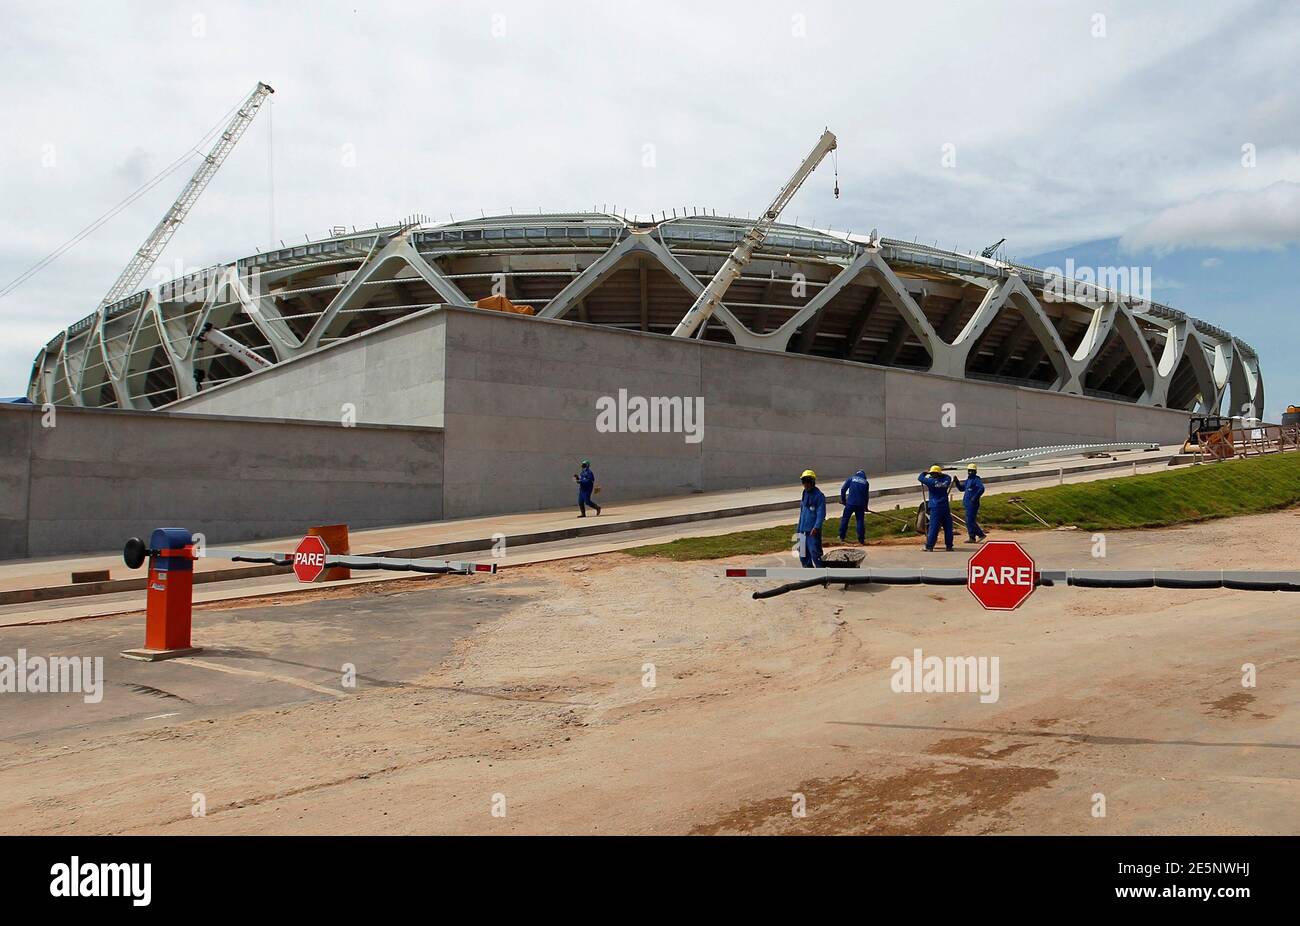 Workers stand outside the Arena Amazonia stadium under construction to host several 2014 World Cup soccer games, in Manaus December 14, 2013. Construction worker Marcleudo de Melo Ferreira fell to his death from the roof earlier in the day after a cable broke, adding to safety concerns as the country races to finish building in time to host the 2014 World Cup of soccer. REUTERS/Bruno Kelly (BRAZIL - Tags: SPORT SOCCER WORLD CUP DISASTER BUSINESS CONSTRUCTION) Stock Photo